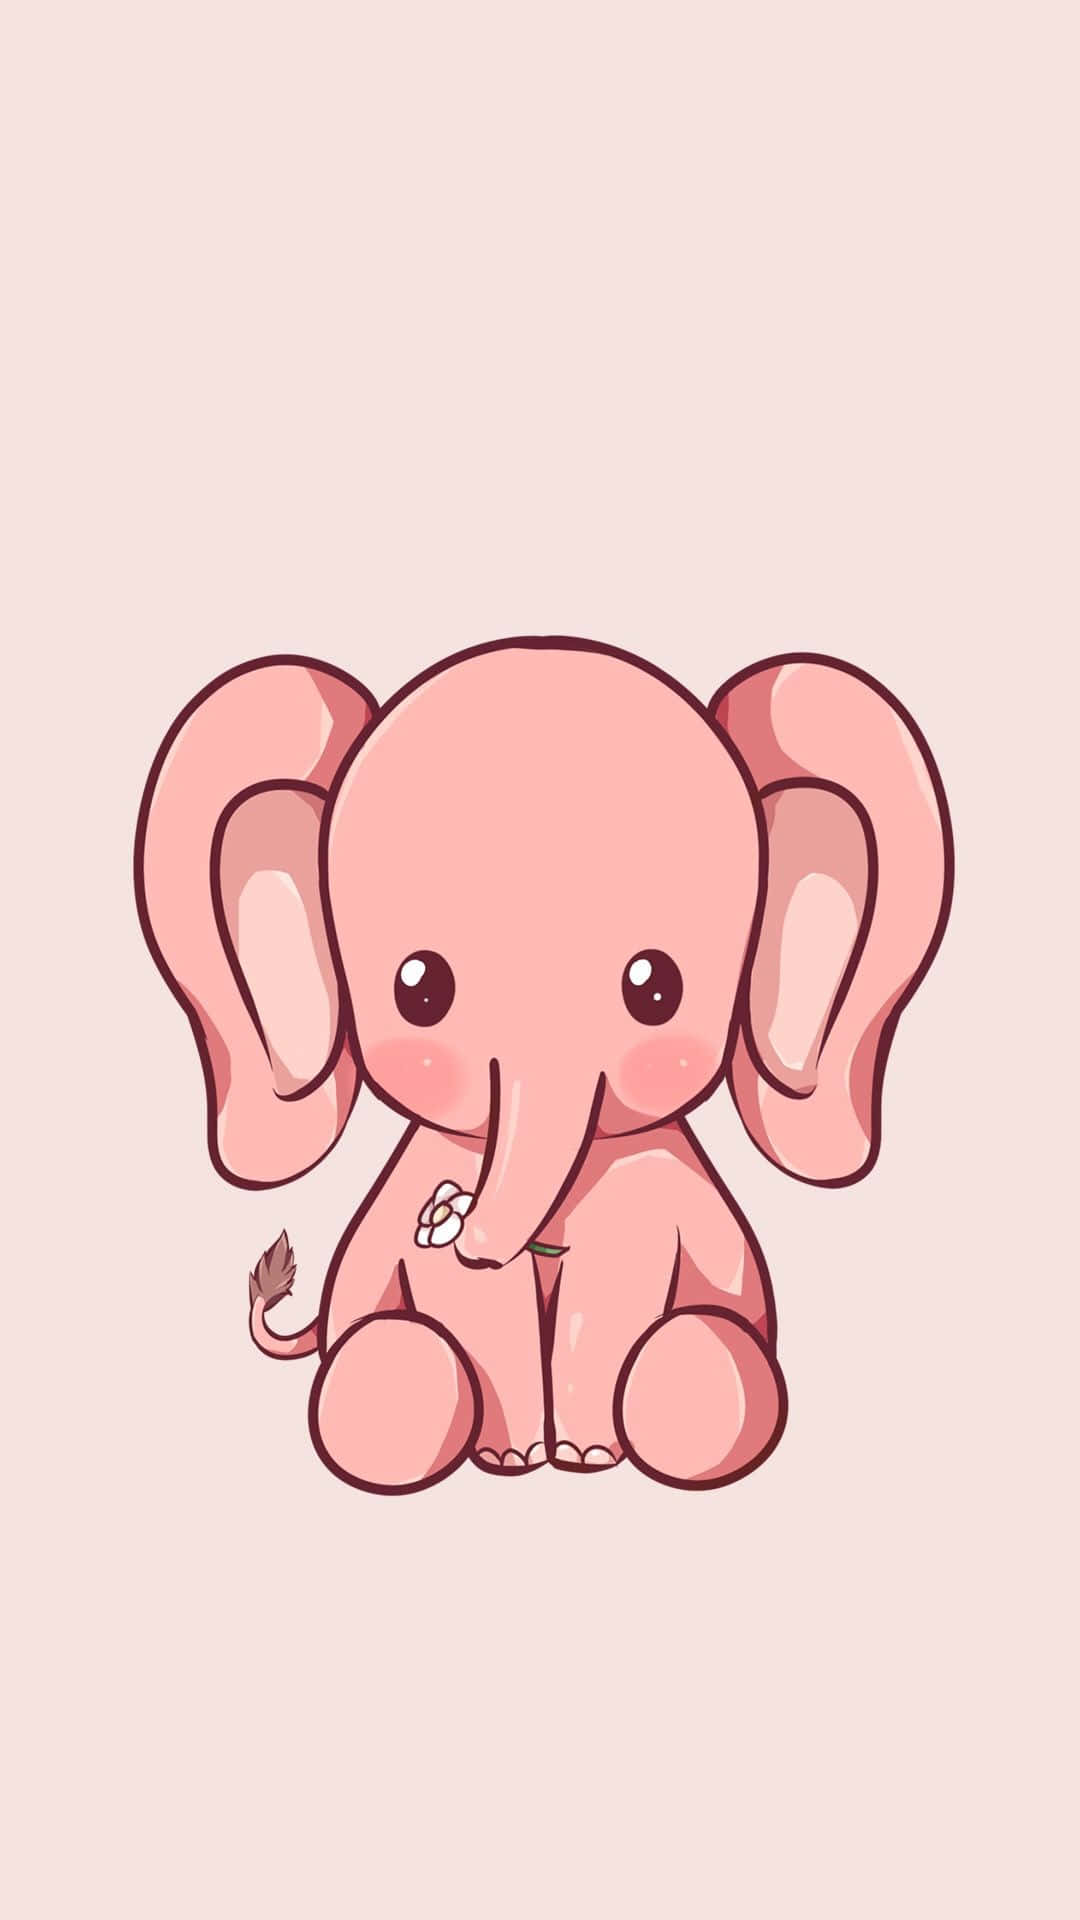 Adorable Kawaii Elephant With Lively Background Wallpaper